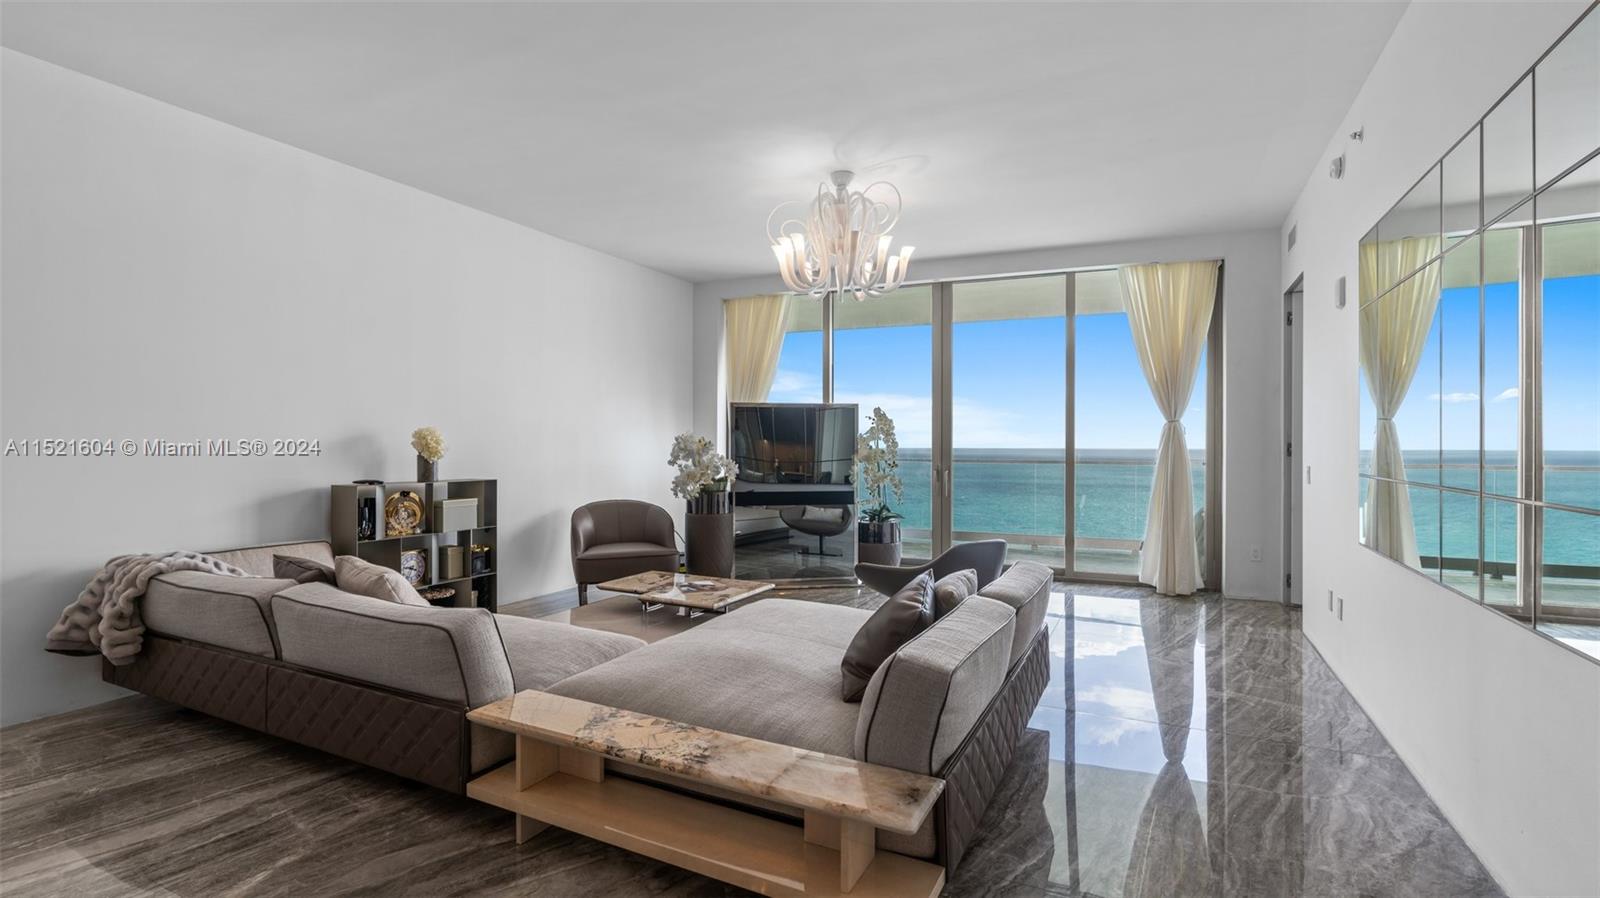 This gorgeous oceanfront condo at one of the top luxury buildings in Sunny Isles boasts more than 3000 sq ft 3 BD 5.5 BA with 970 Sq.Ft of terrace space and feels like a single family home in the sky. With private foyer & elevator, bright open east to west flow thru floor plan, top quality finishes, 10 ft ceilings, 2 X-large balconies, offering the most magnificent views of the ocean, bay & intracoastal. Top of the line Italian custom built-in closets, high-end Italian porcelain floors, custom-made window treatments, high impact windows, ultra modern kitchen w/European-design cabinetry, Wolf appliances, Sub Zero refrigerator & wine cooler. 35,000 sq.ft of luxury amenities: Oceanfront Resort Style Pool, Bar, State-of-the-art Fitness Center, 2-story Spa, children's play room, cigar lounge.